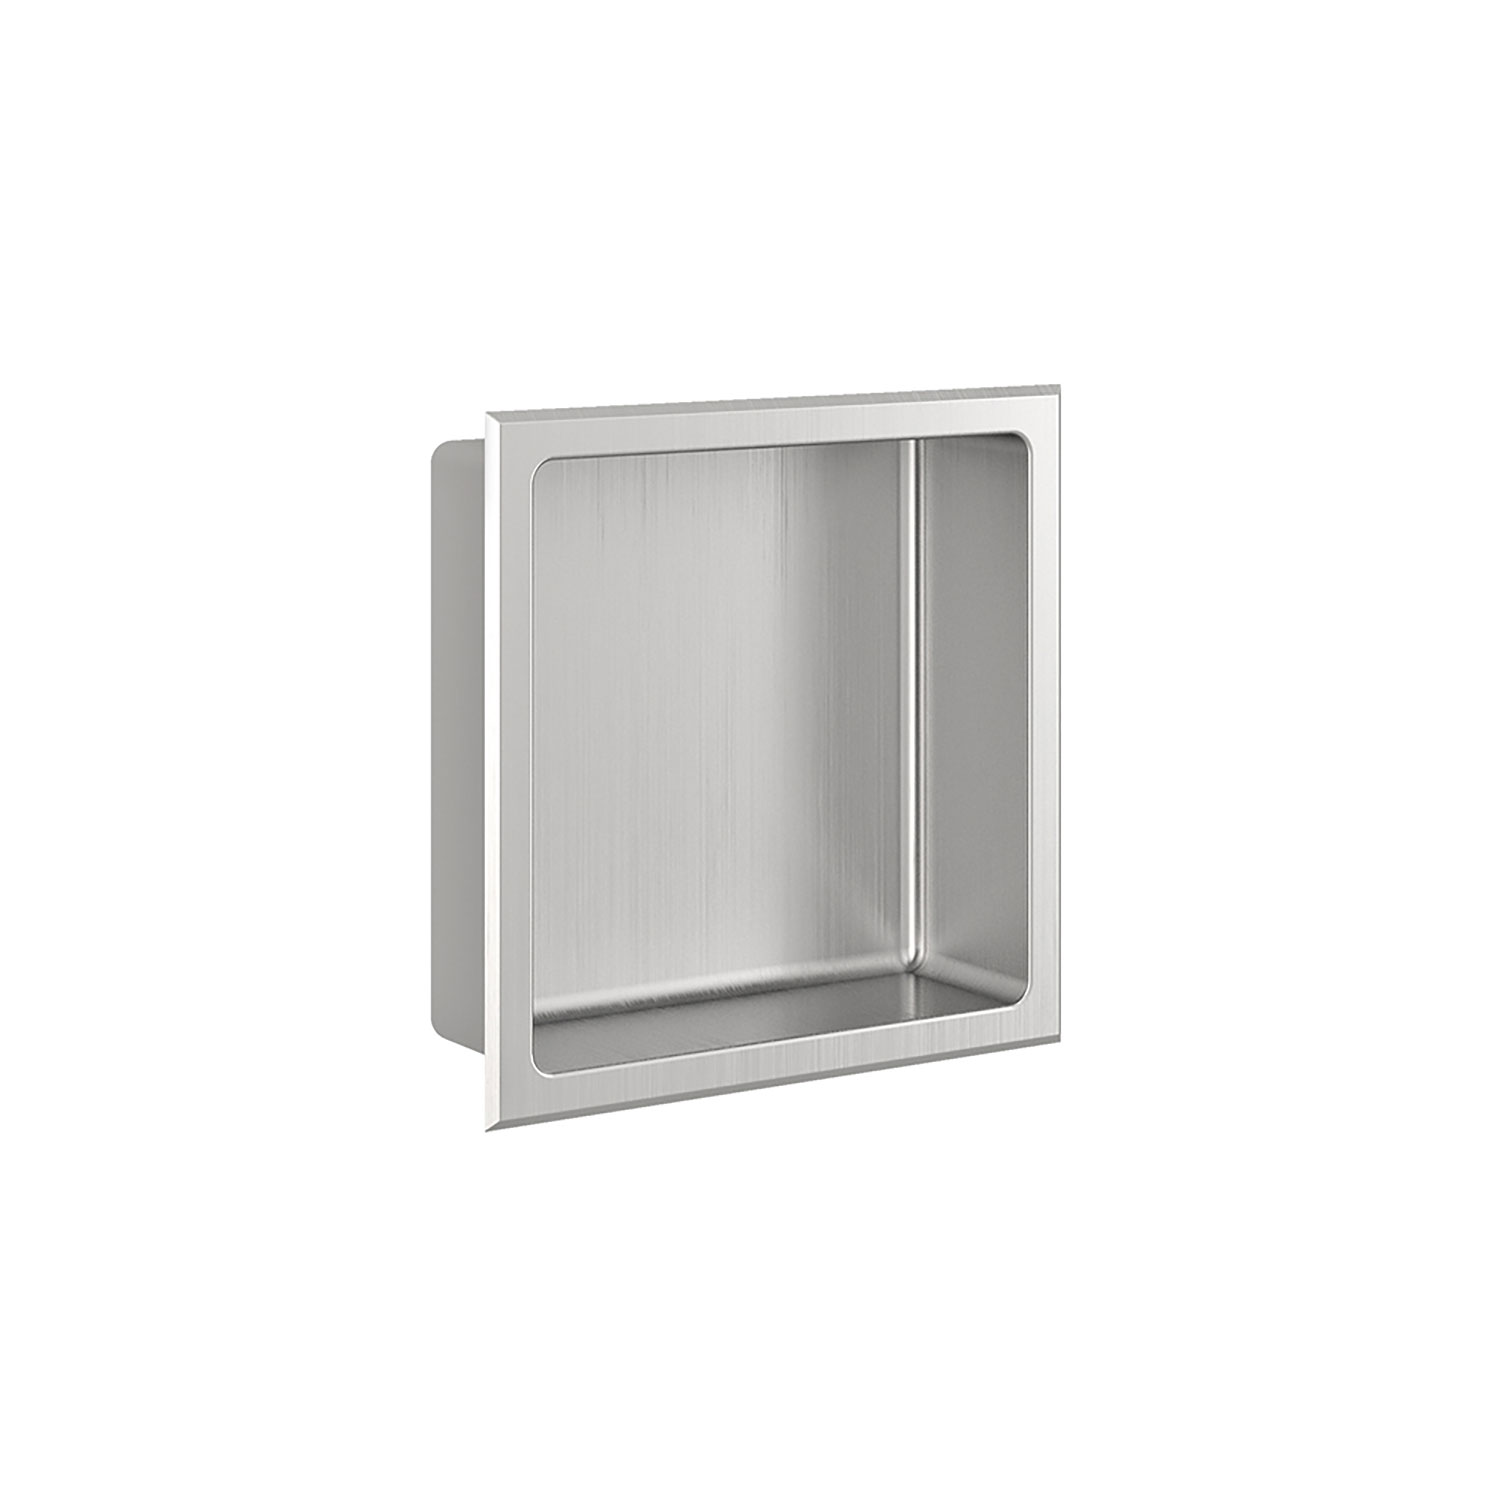 Brushed stainless steel niche 12